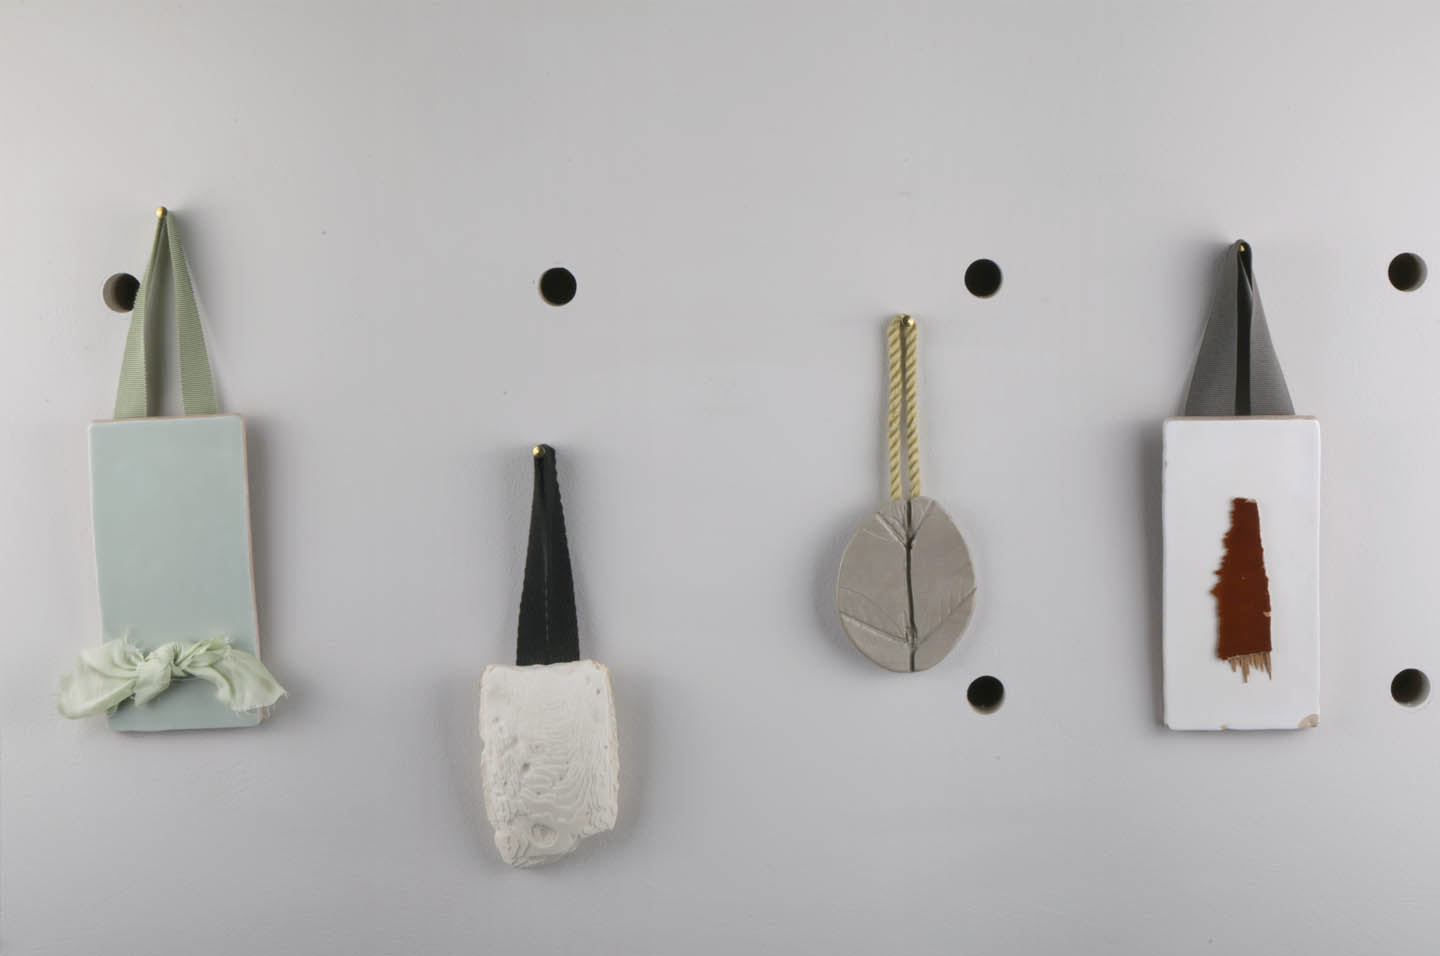 The collected objects of Danka Nisevic